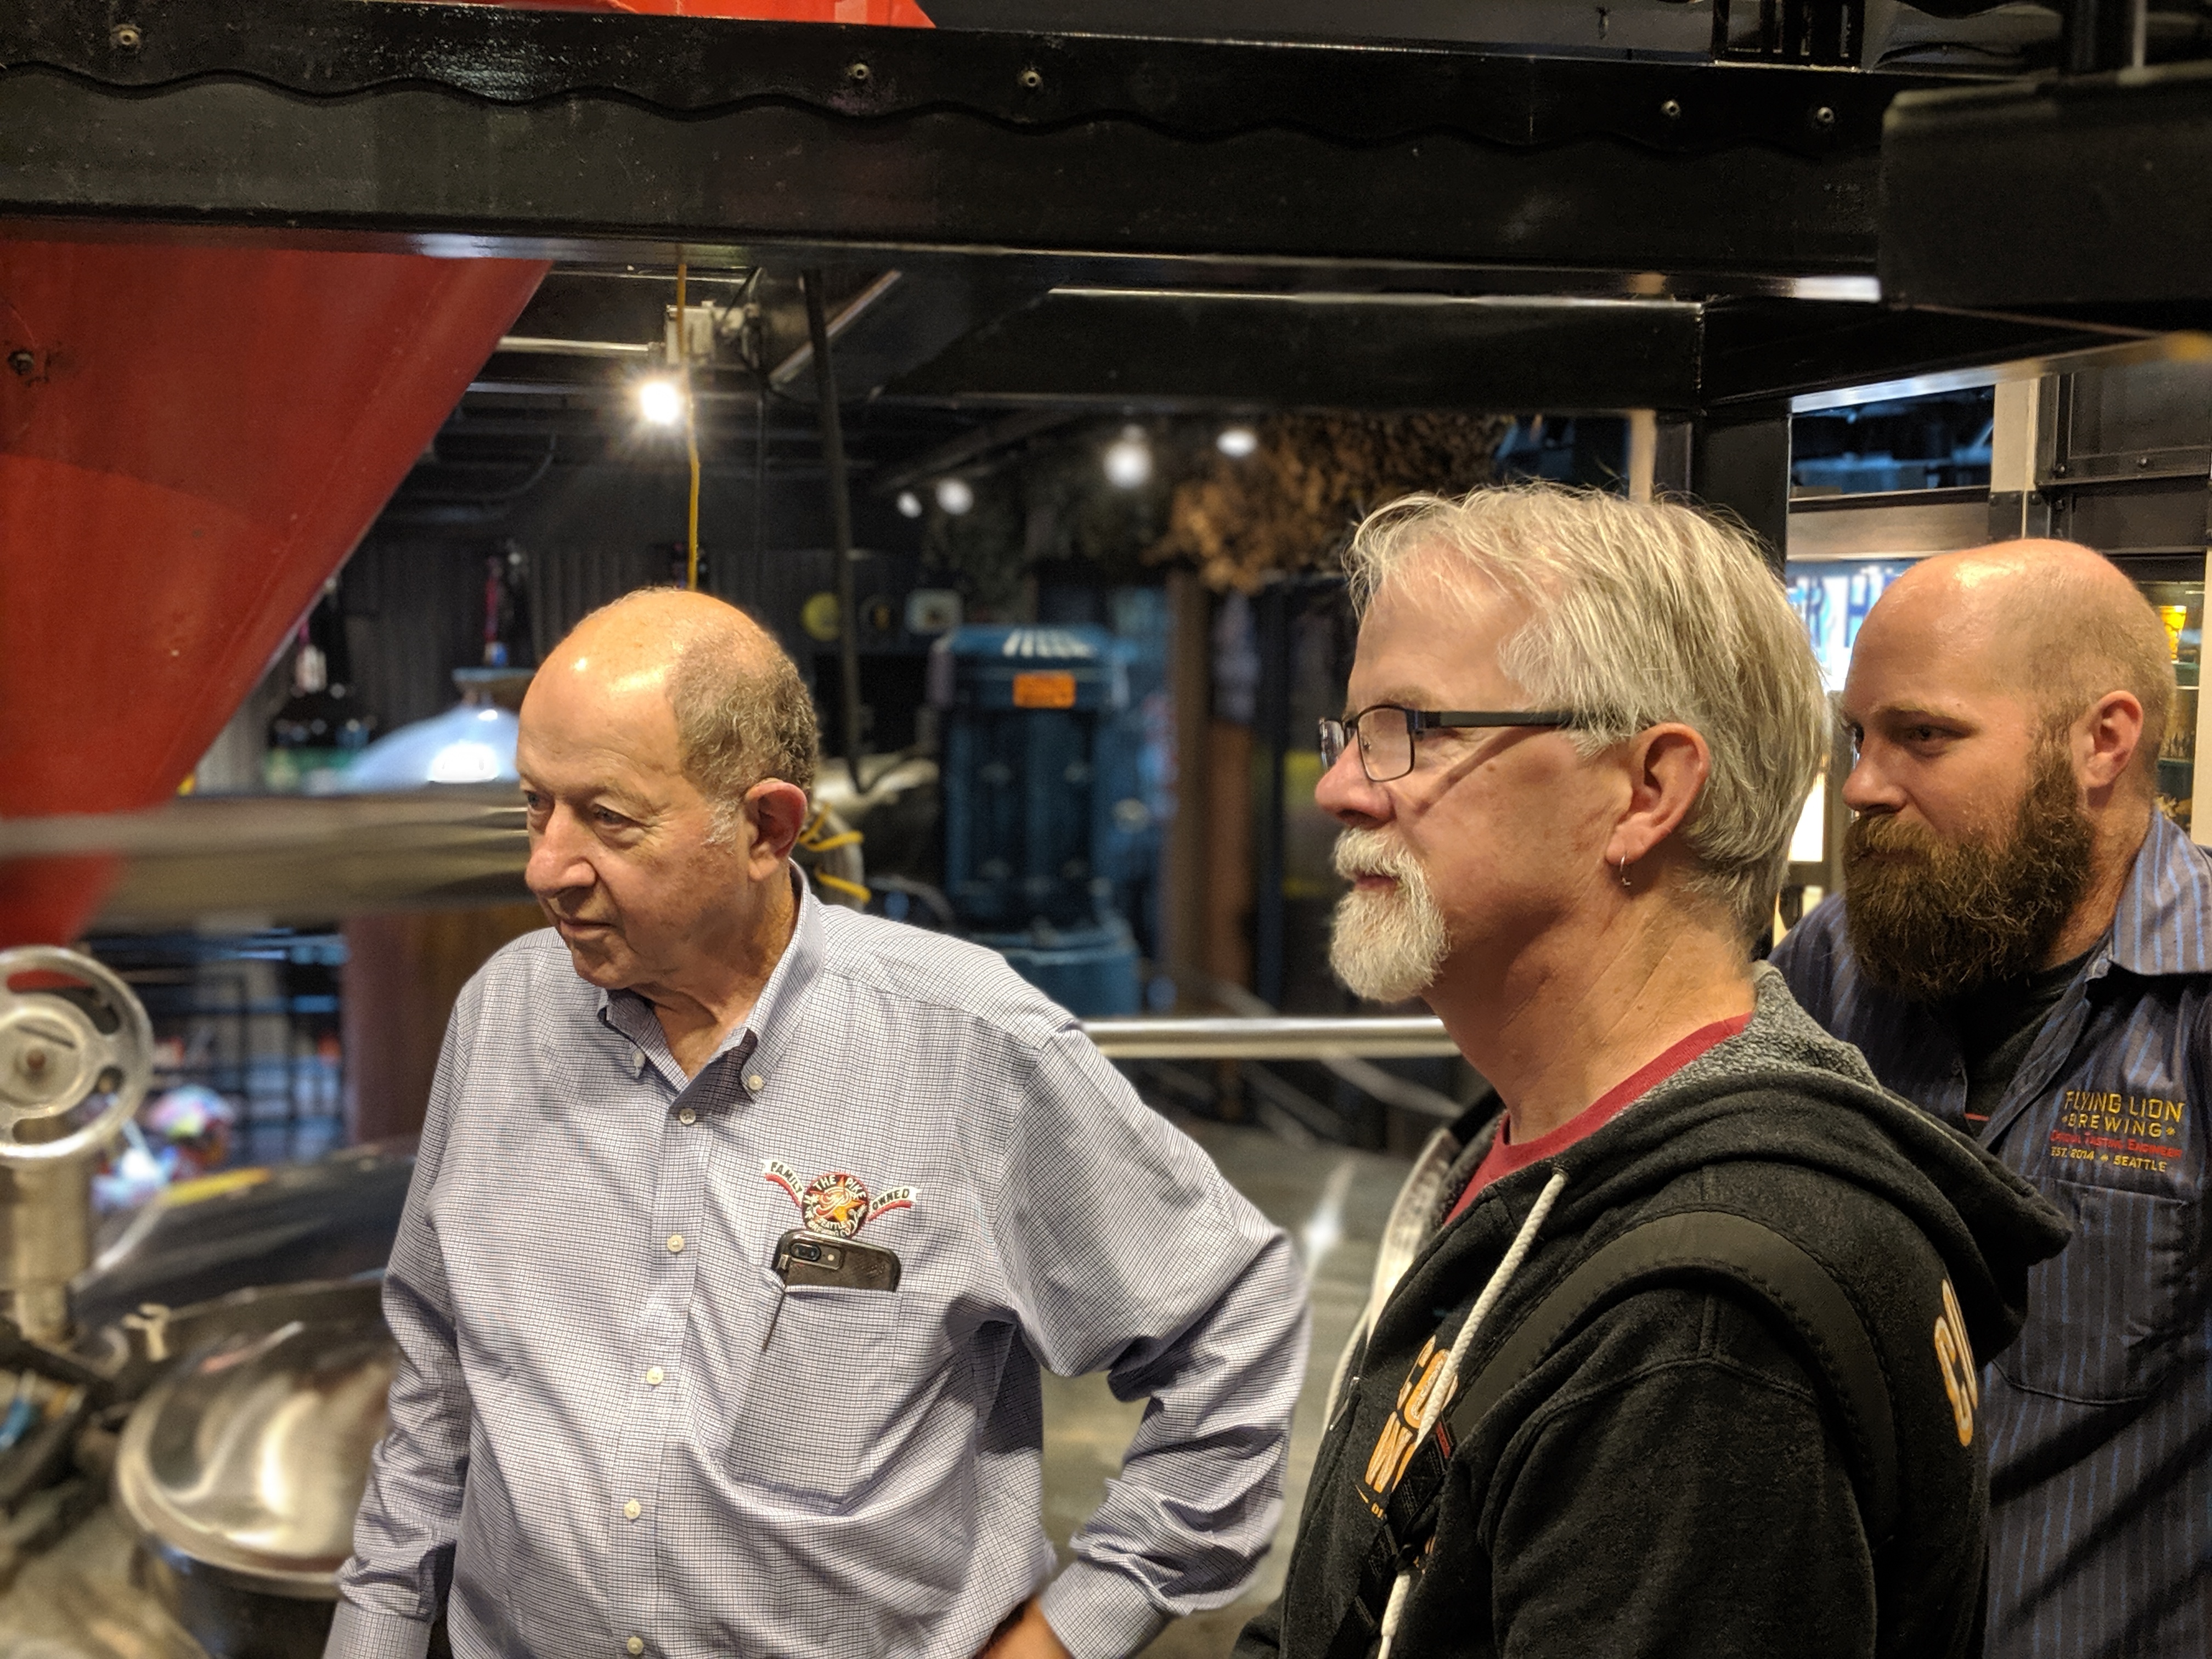 Charles Finkel, Jason Parker, Adam Orick at Pike Brewing brewing Pike Reunion IPA. (image courtesy of Pike Brewing)